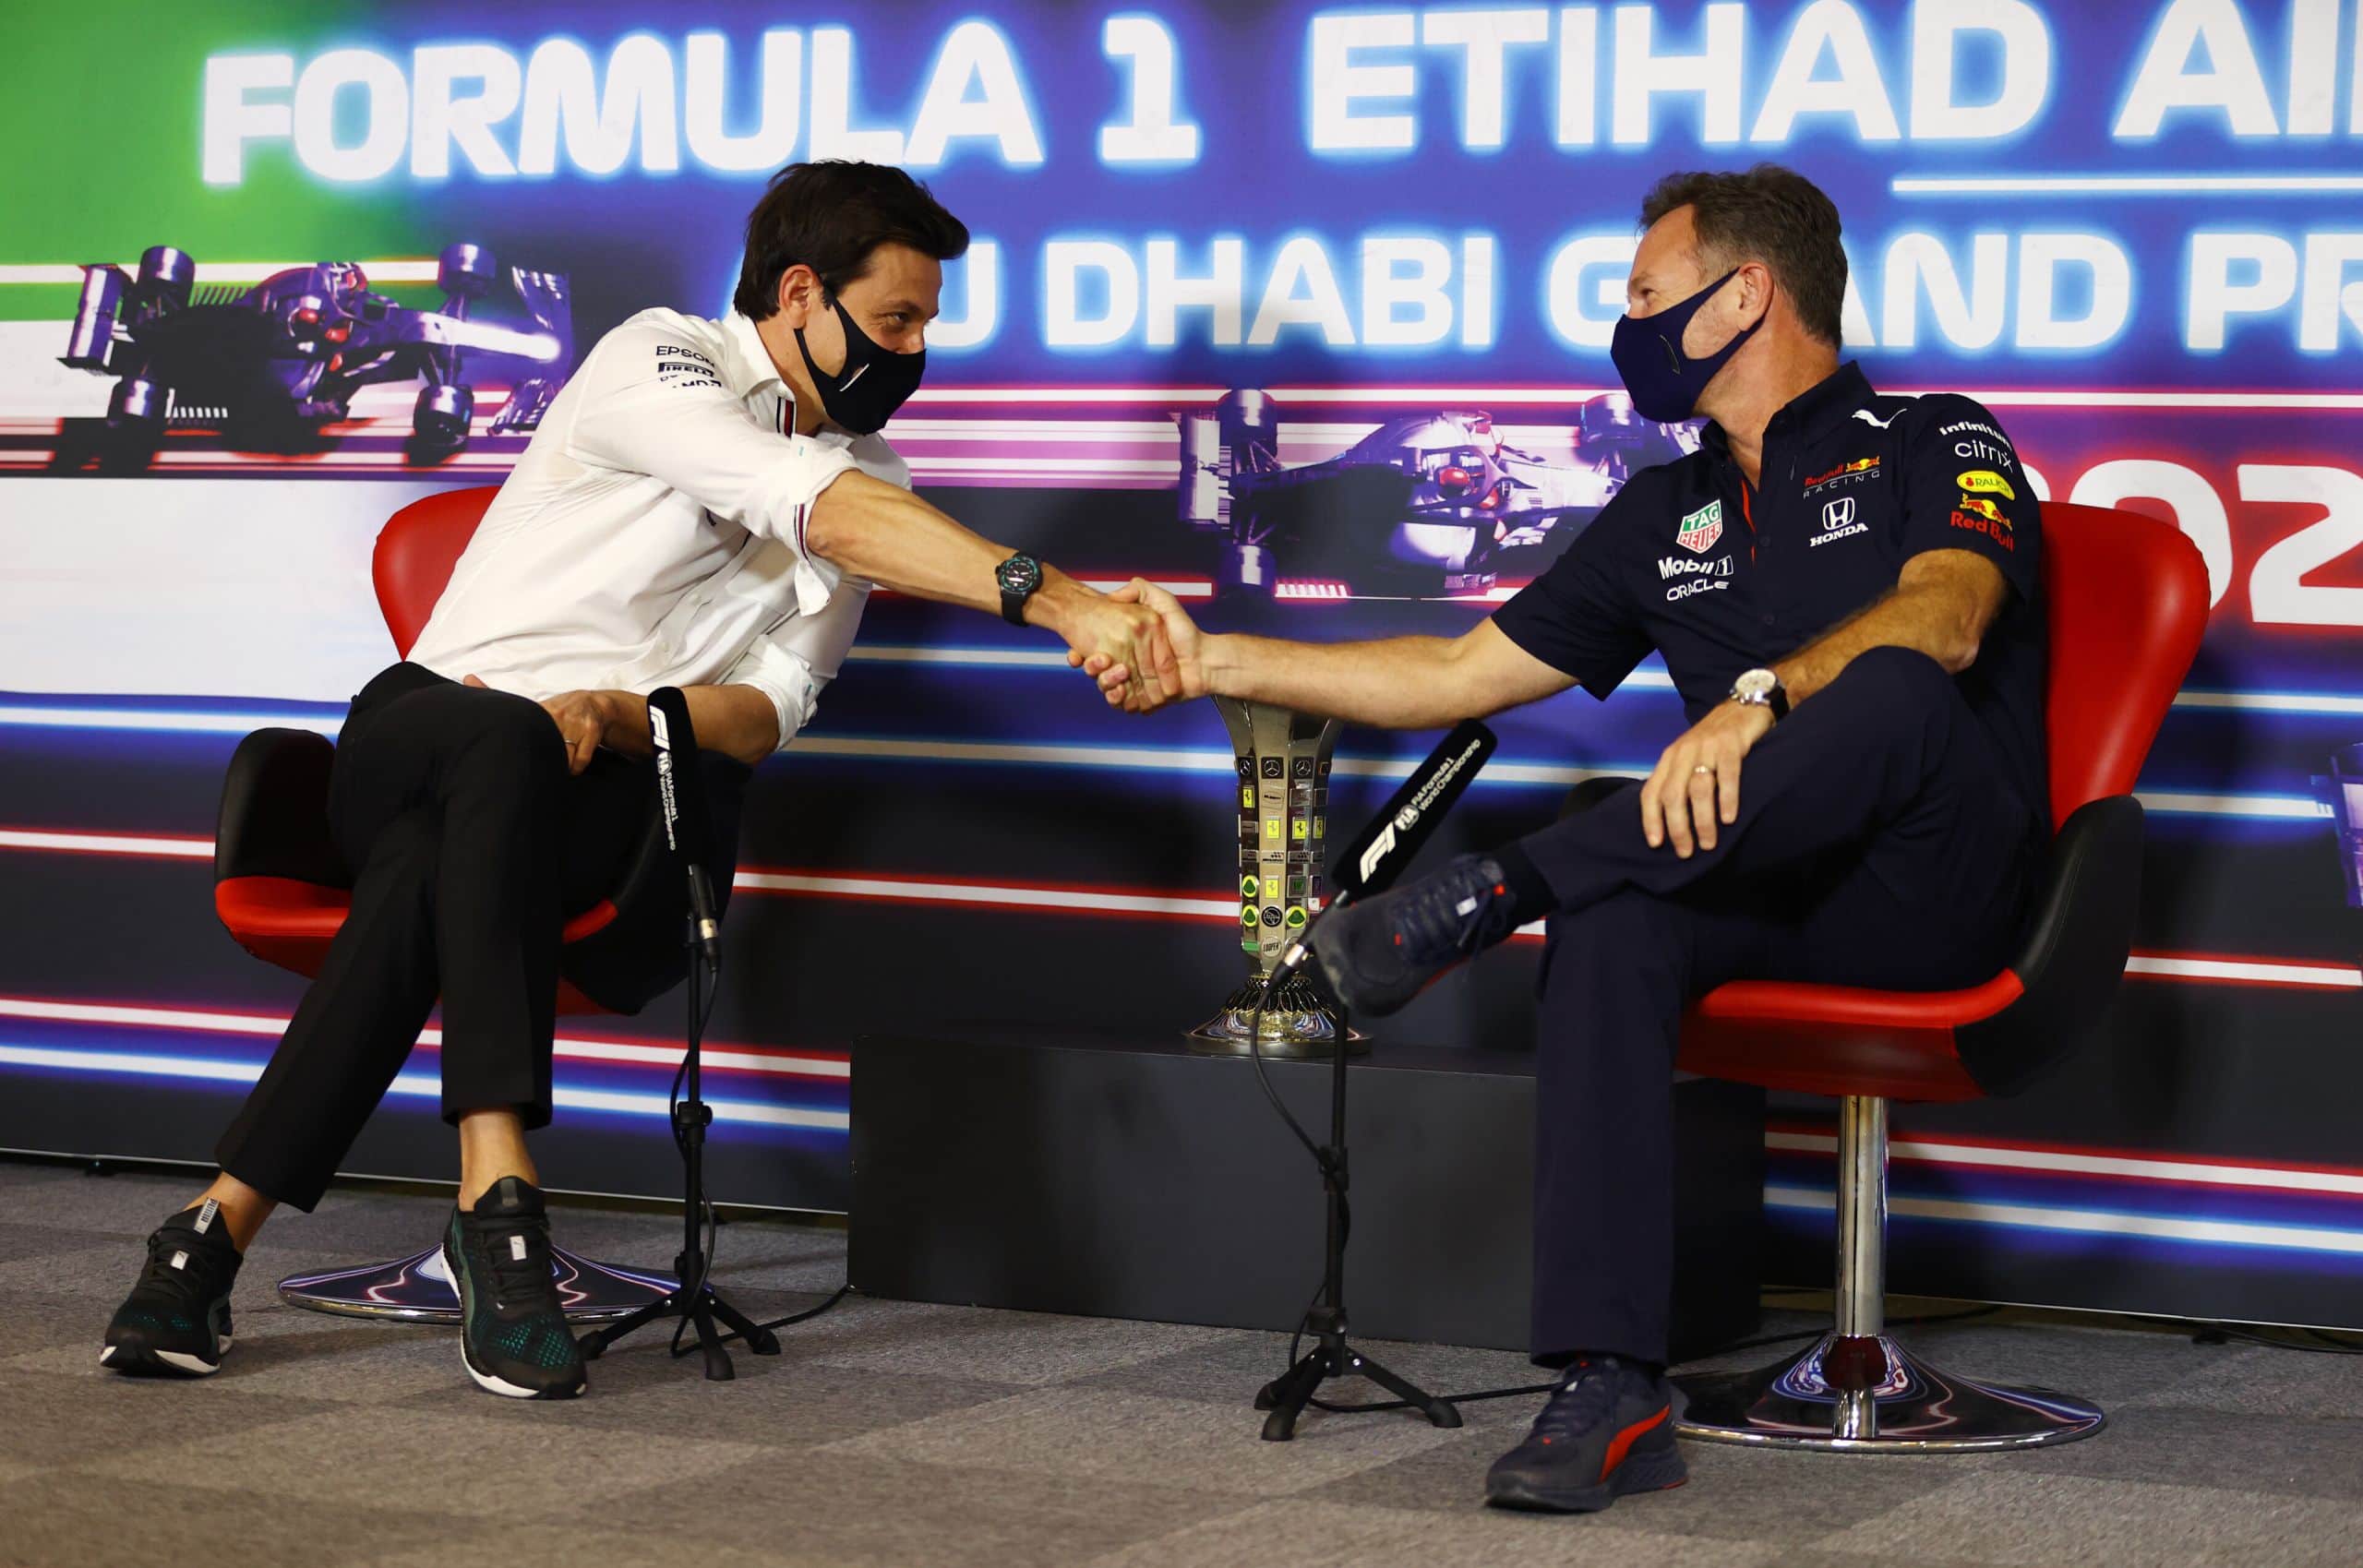 ABU DHABI, UNITED ARAB EMIRATES - DECEMBER 1 0: Mercedes GP Executive Director Toto Wolff and Red Bull Racing Team Principal Christian Horner shake hands in the team principals press conference ahead of the F1 Grand Prix of Abu Dhabi at Yas Marina Circuit on December 10, 2021 in Abu Dhabi, United Arab Emirates. (Photo by Bryn Lennon/Getty Images) // Getty Images / Red Bull Content Pool // SI202112100275 // Usage for editorial use only //